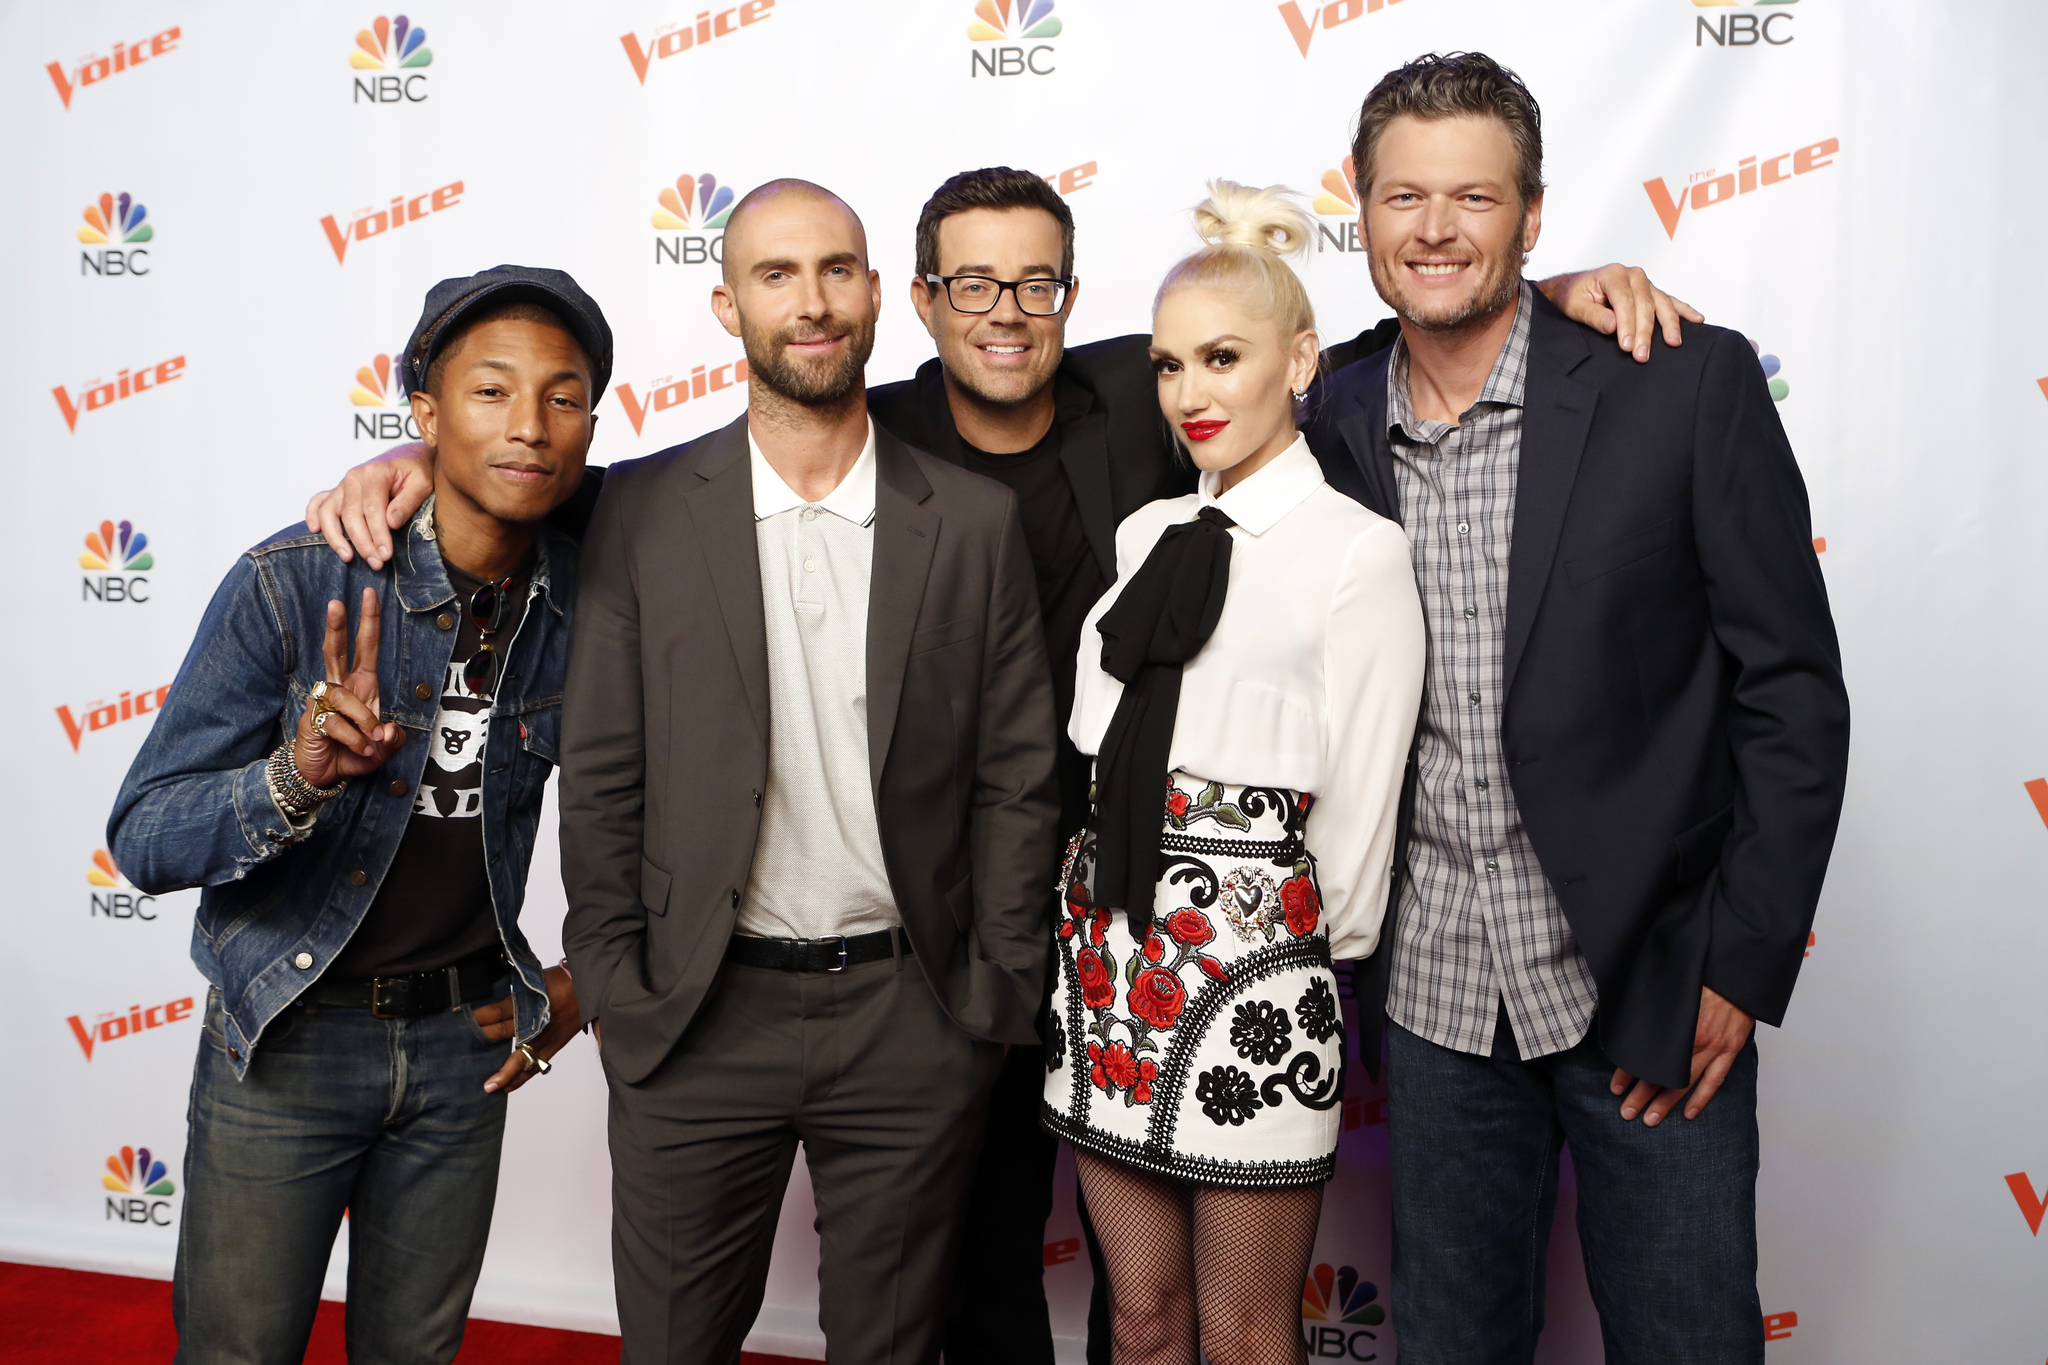 Carson Daly, Gwen Stefani, Pharrell Williams, Blake Shelton and Adam Levine at event of The Voice (2011)